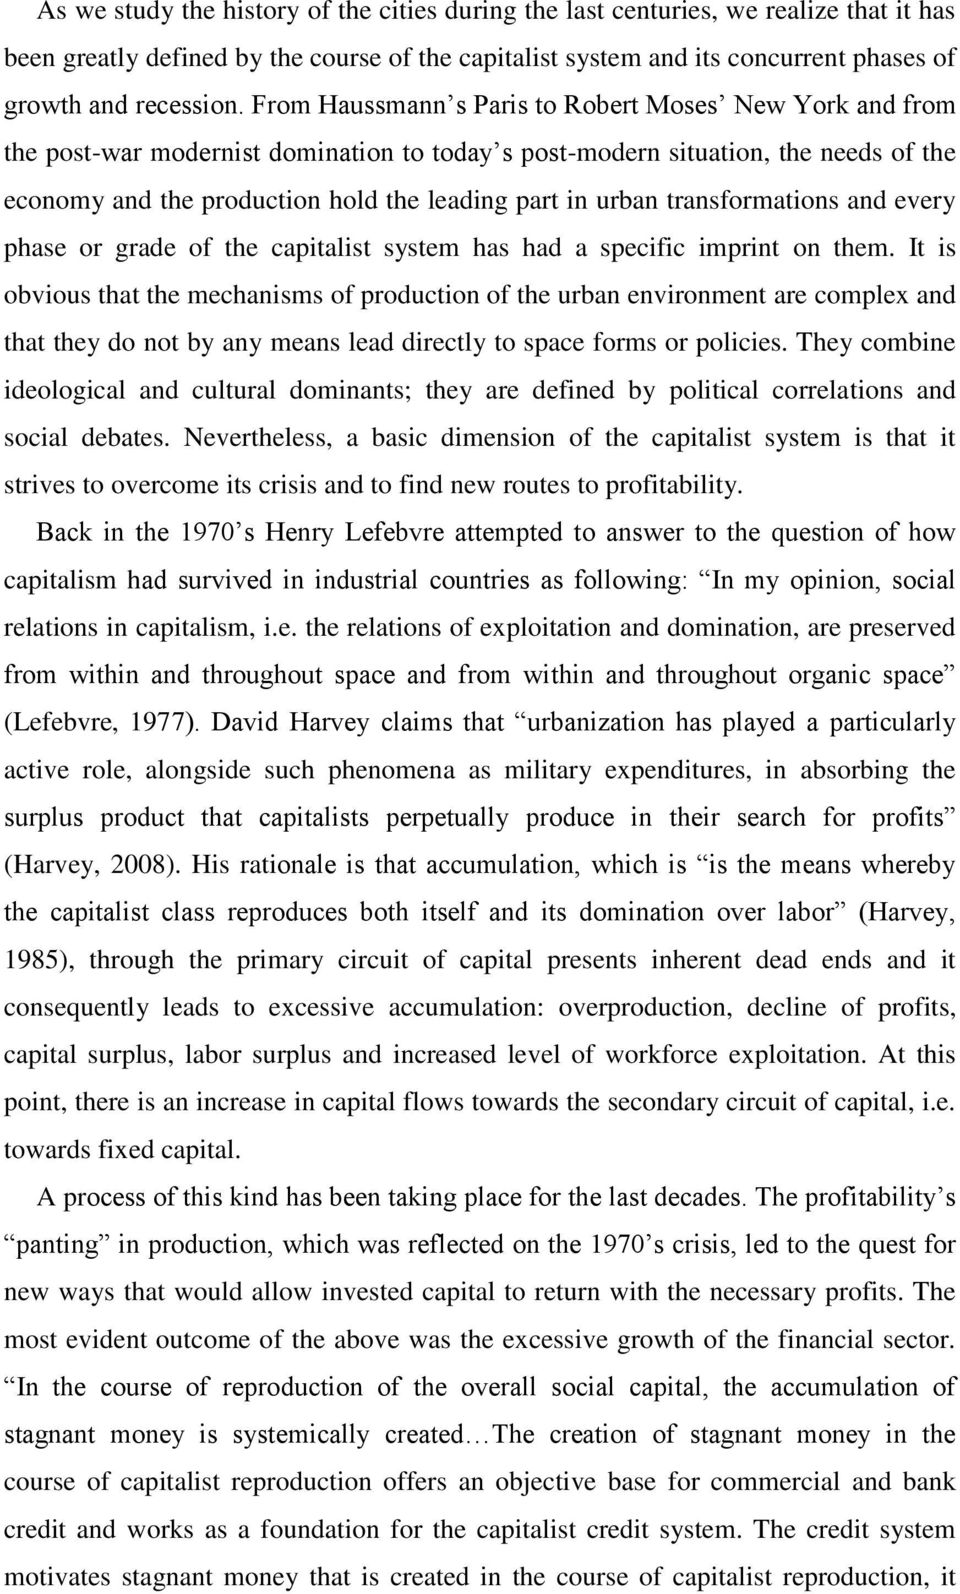 transformations and every phase or grade of the capitalist system has had a specific imprint on them.